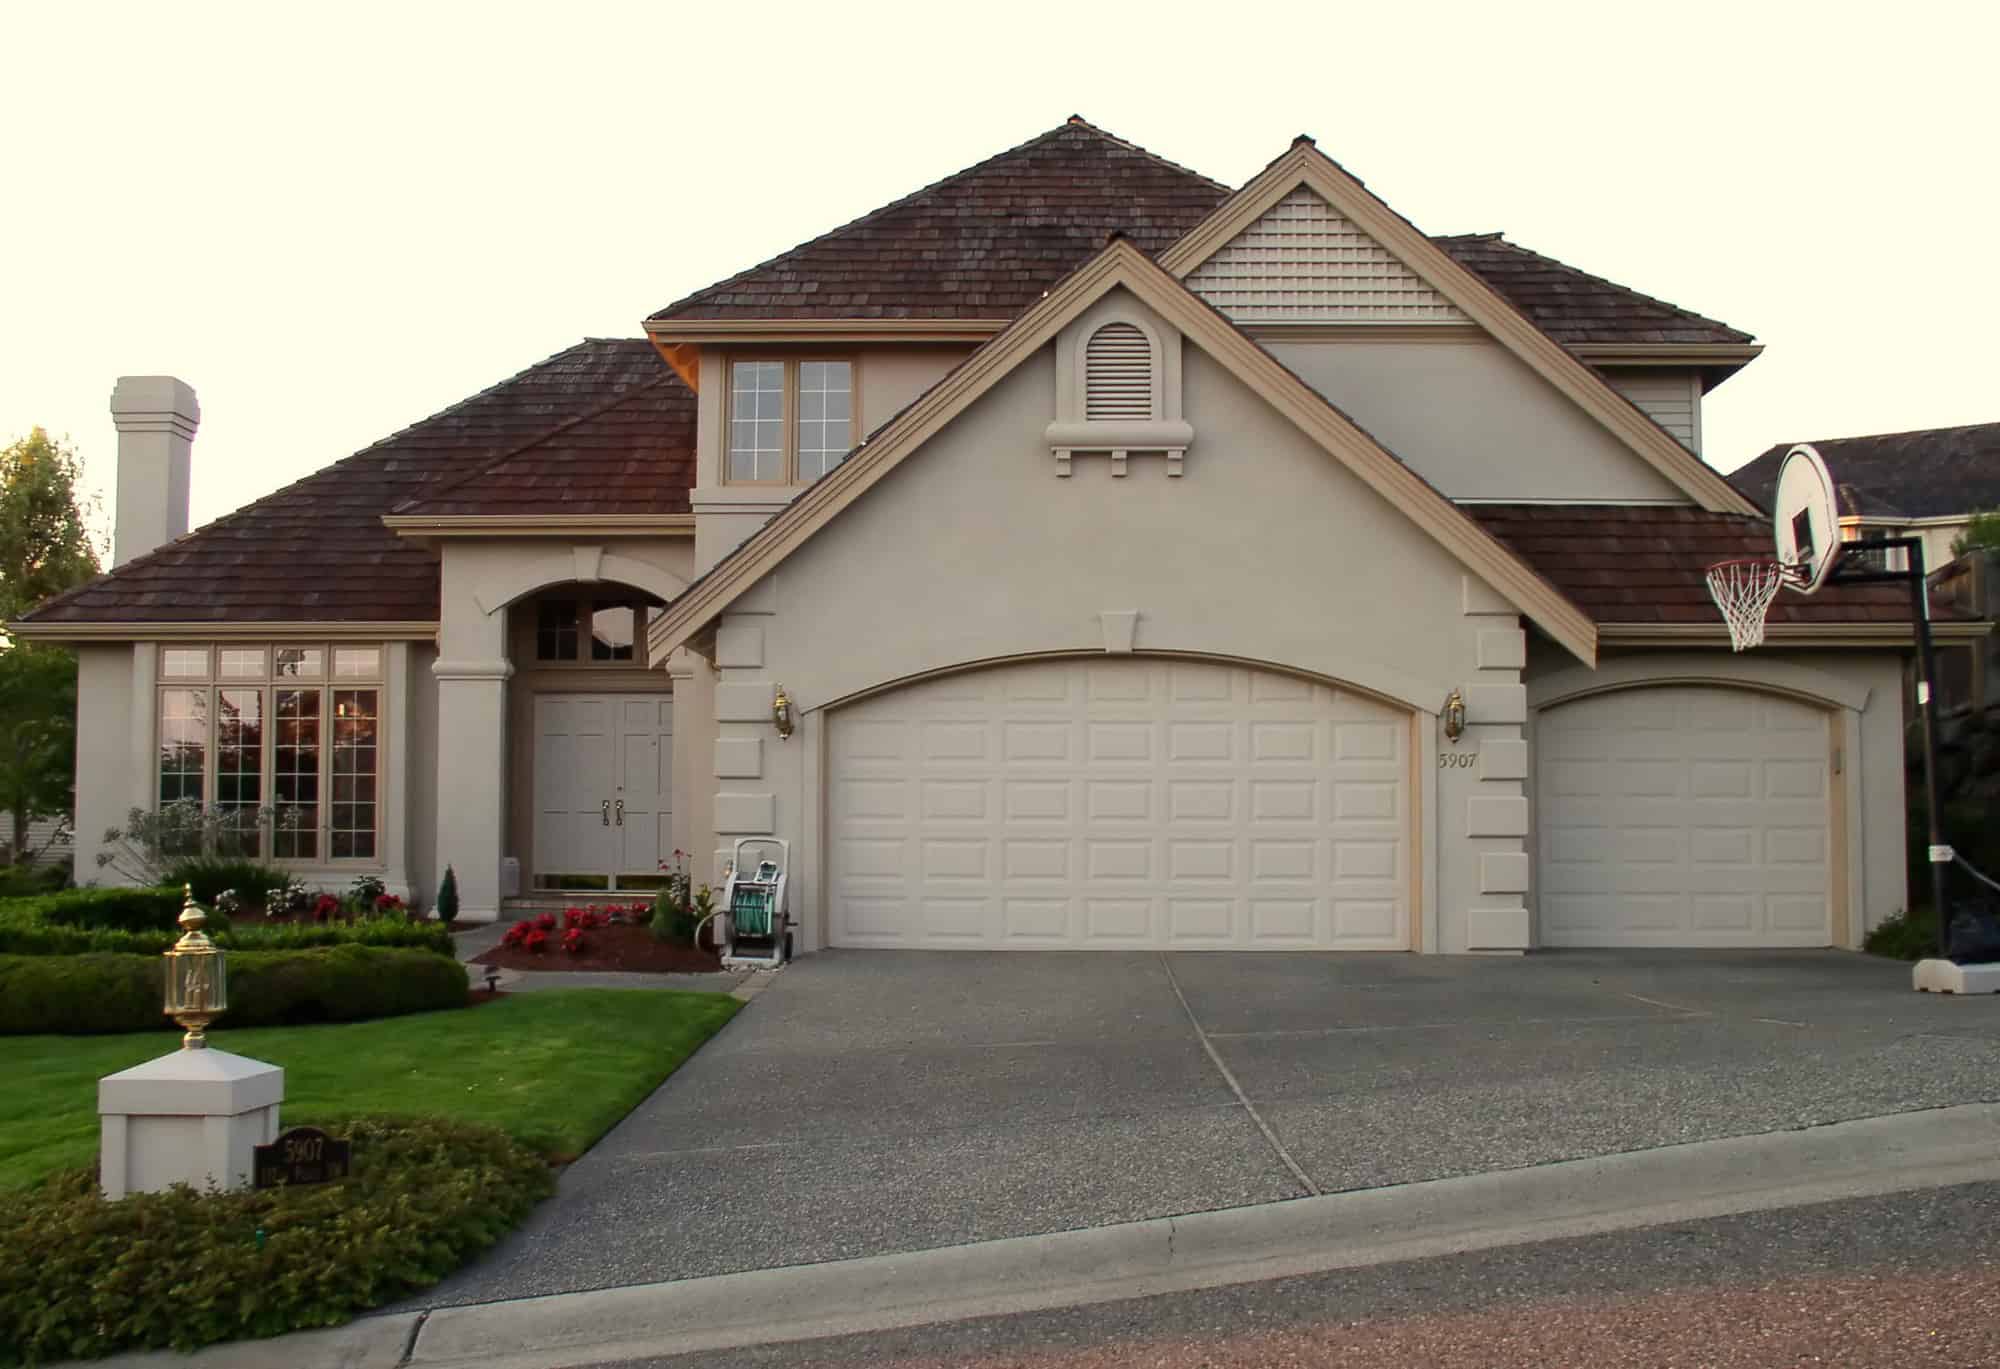 Common Types of Garage Doors: What's Best for Your Home?